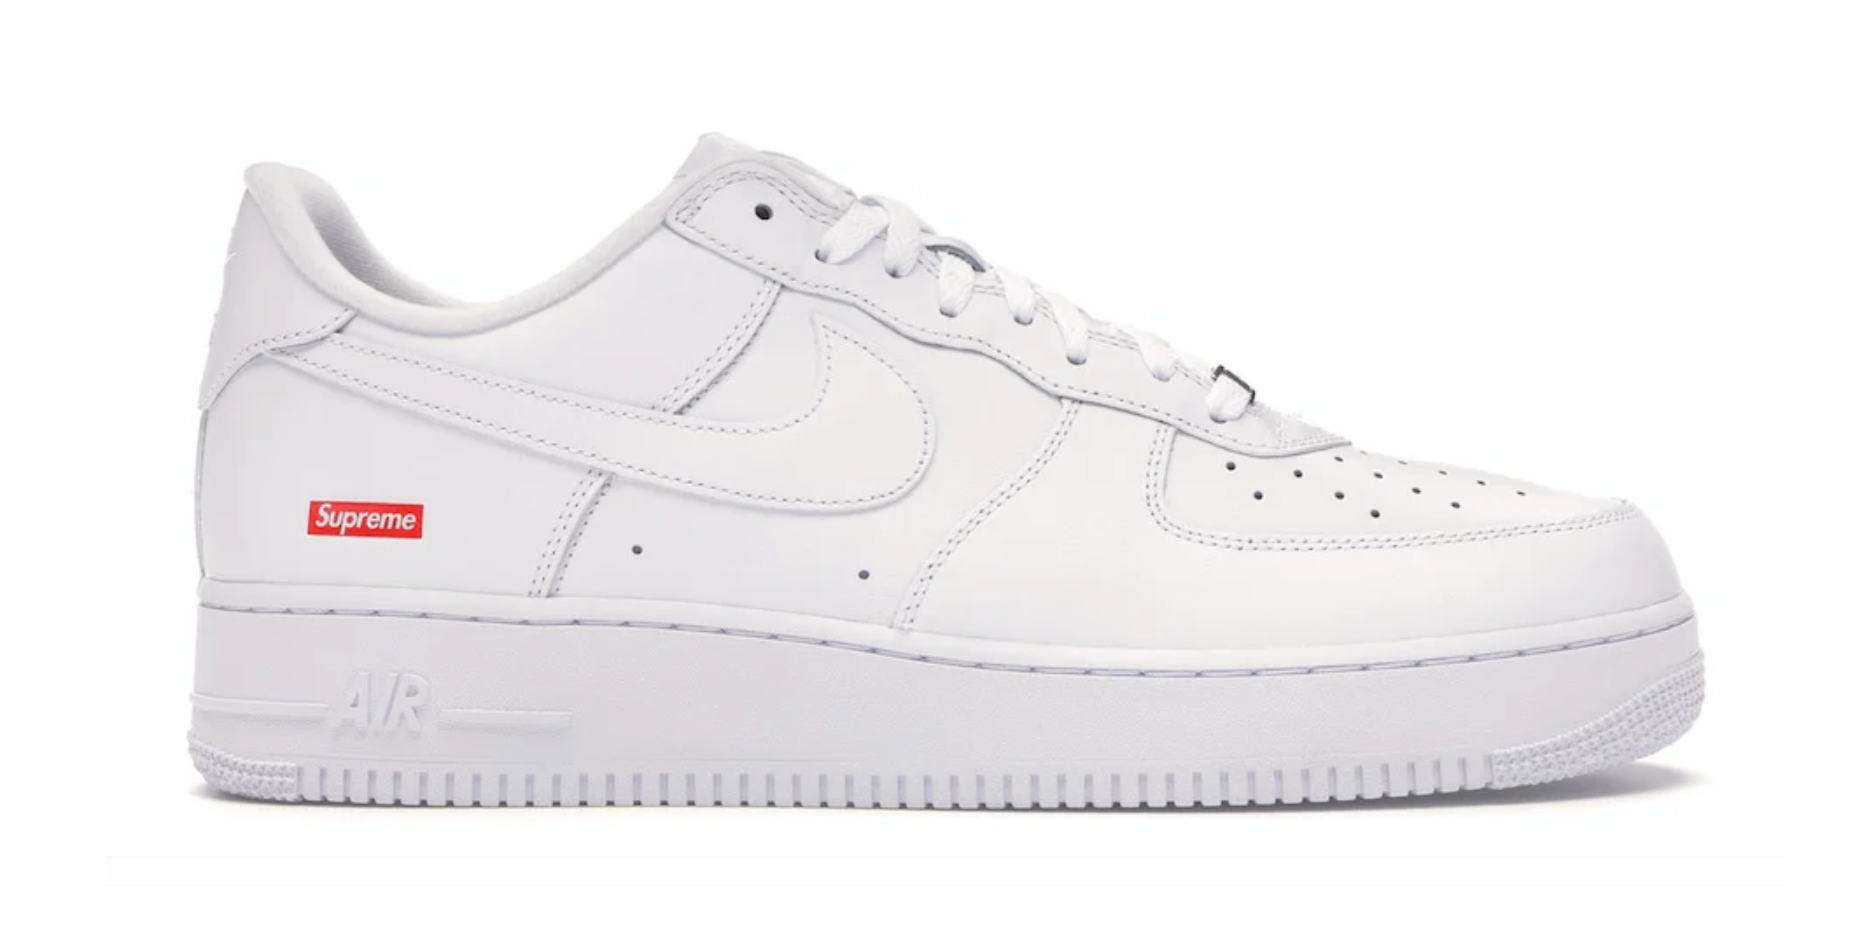 NIKE AIR FORCE 1 LOW SUPREME WEISS